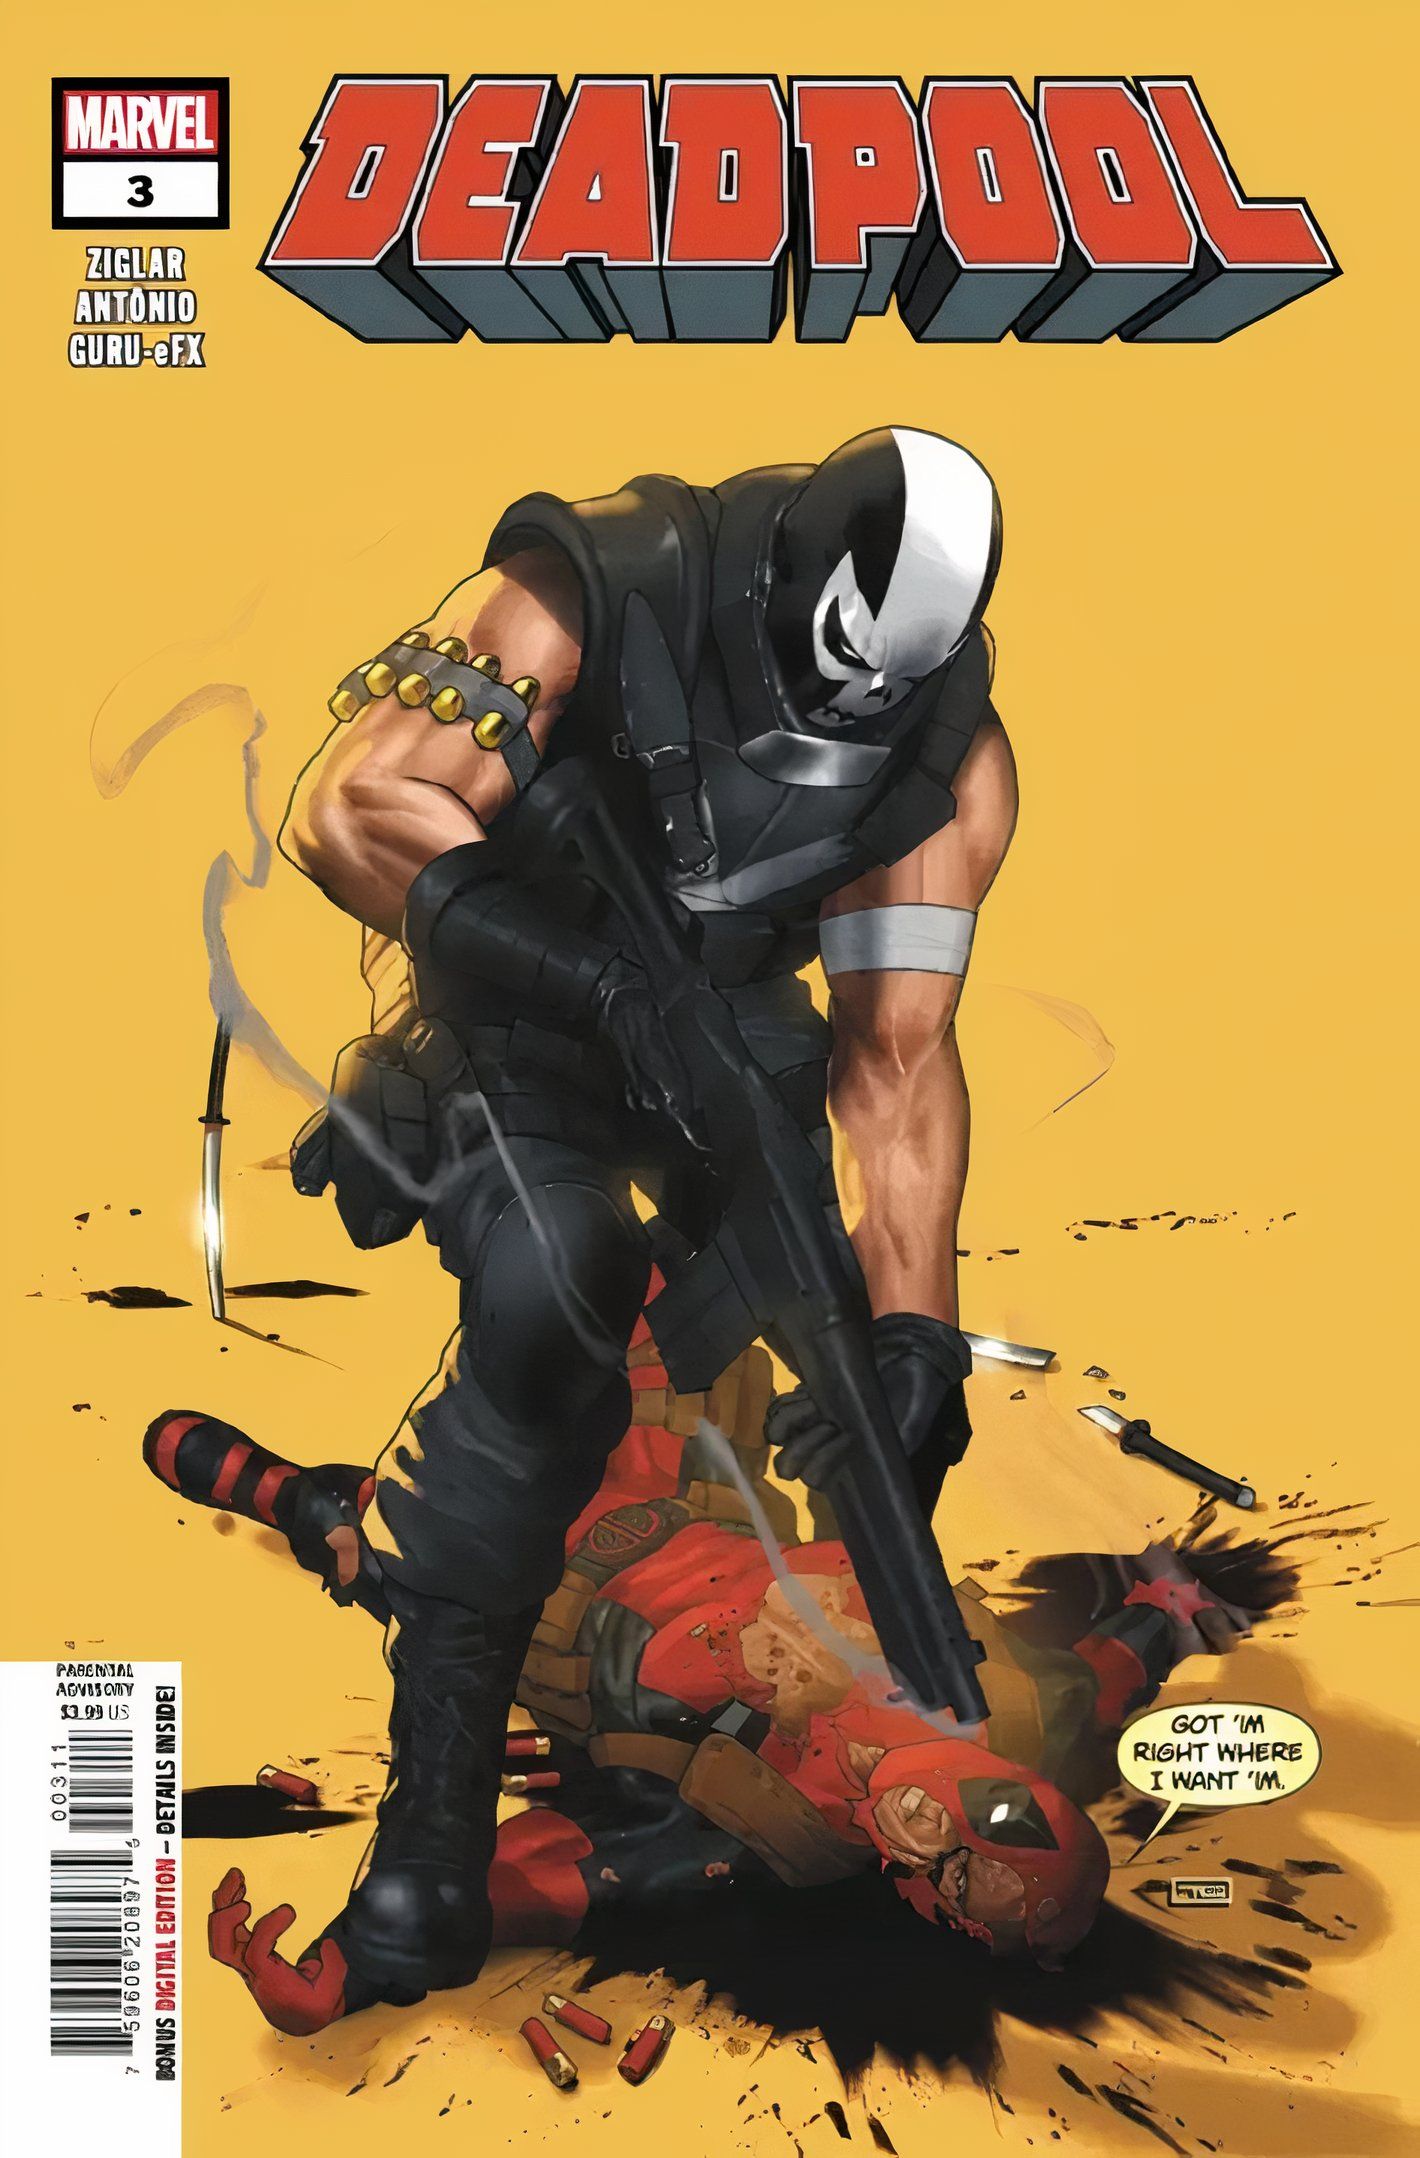 Deadpool #3 cover, Deadpool laying in a pool of blood as Crossbones stands over him.